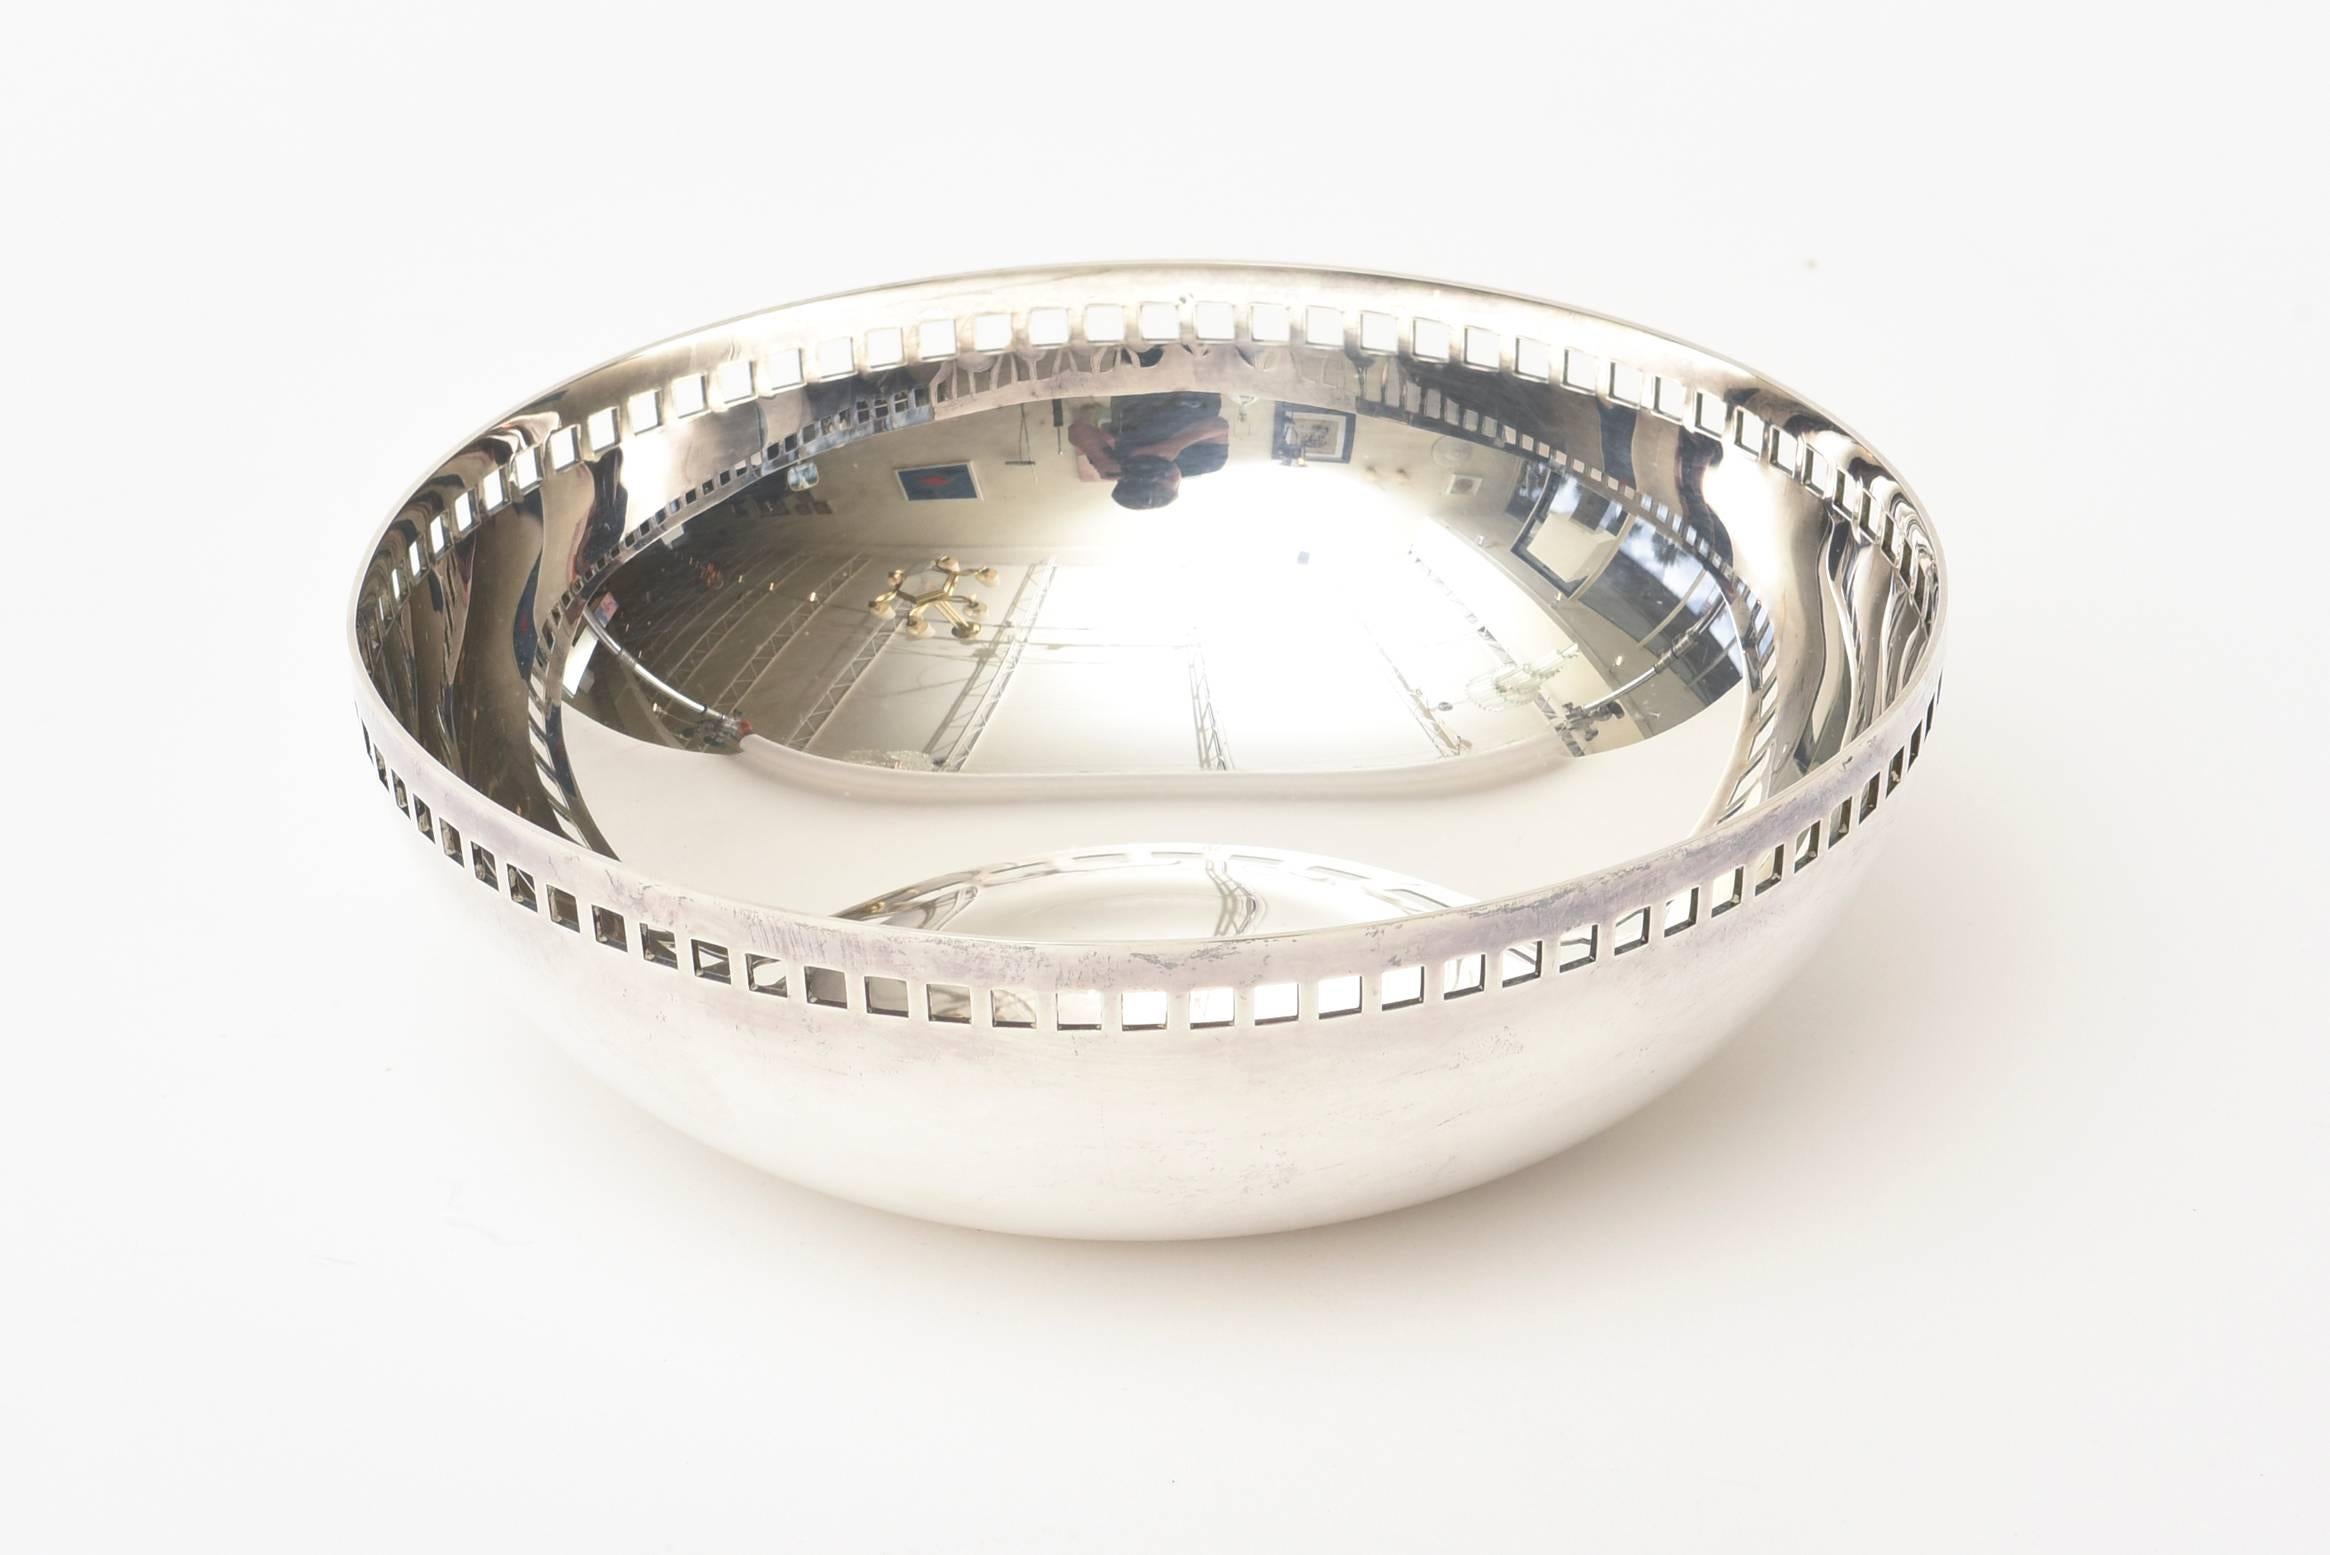 This lovely architectural silver plate bowl designed by Richard Meier for Swid Powell is called the Skyscraper.
It is modernist and timeless. Made in Italy and from the 80's.
It is a forever bowl that can be used for serving or simply